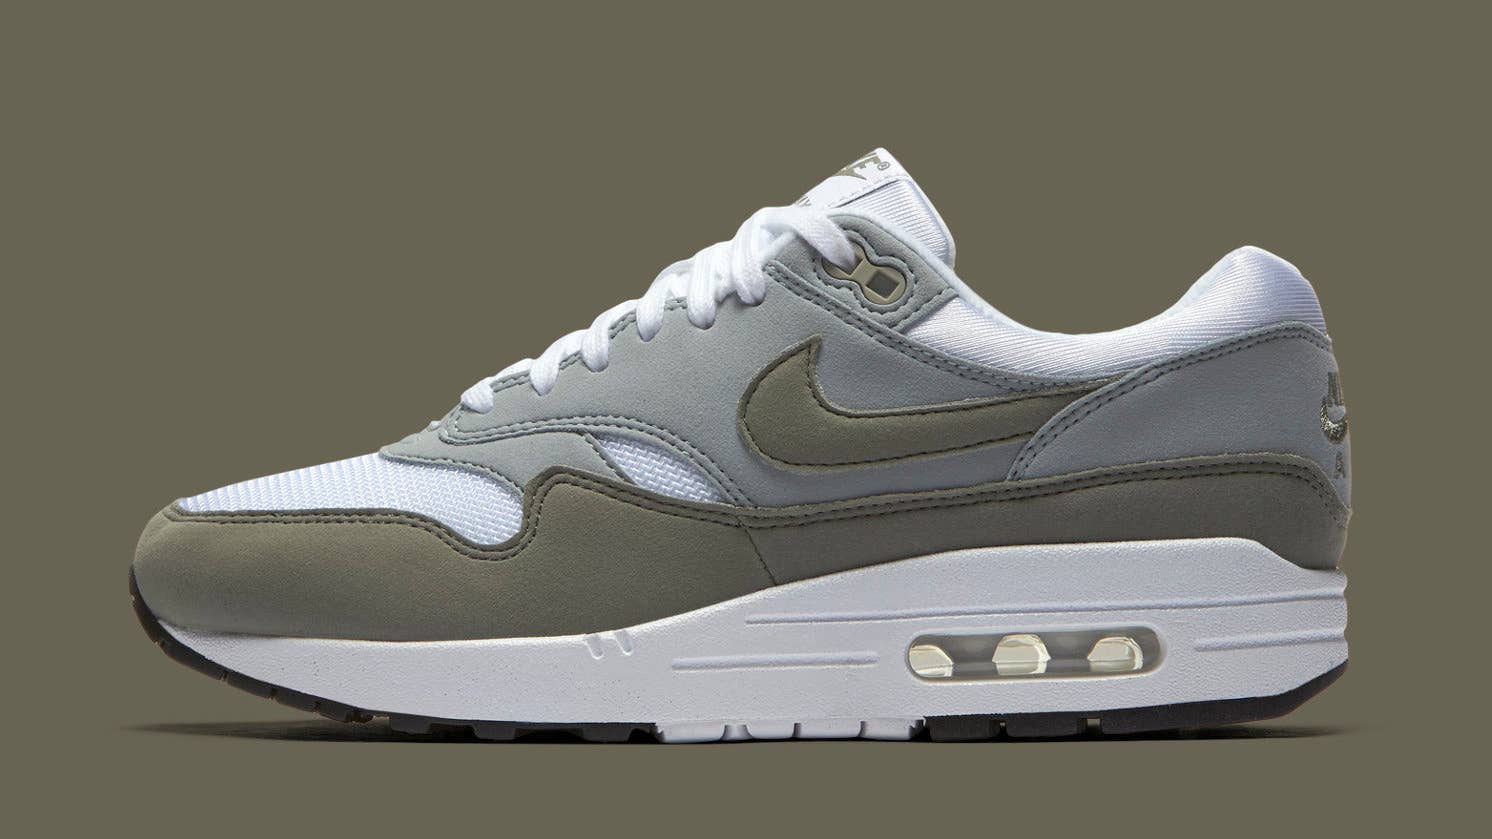 Transistor Moment Phalanx New Air Max 1s Look Like Patta's Collab | Complex